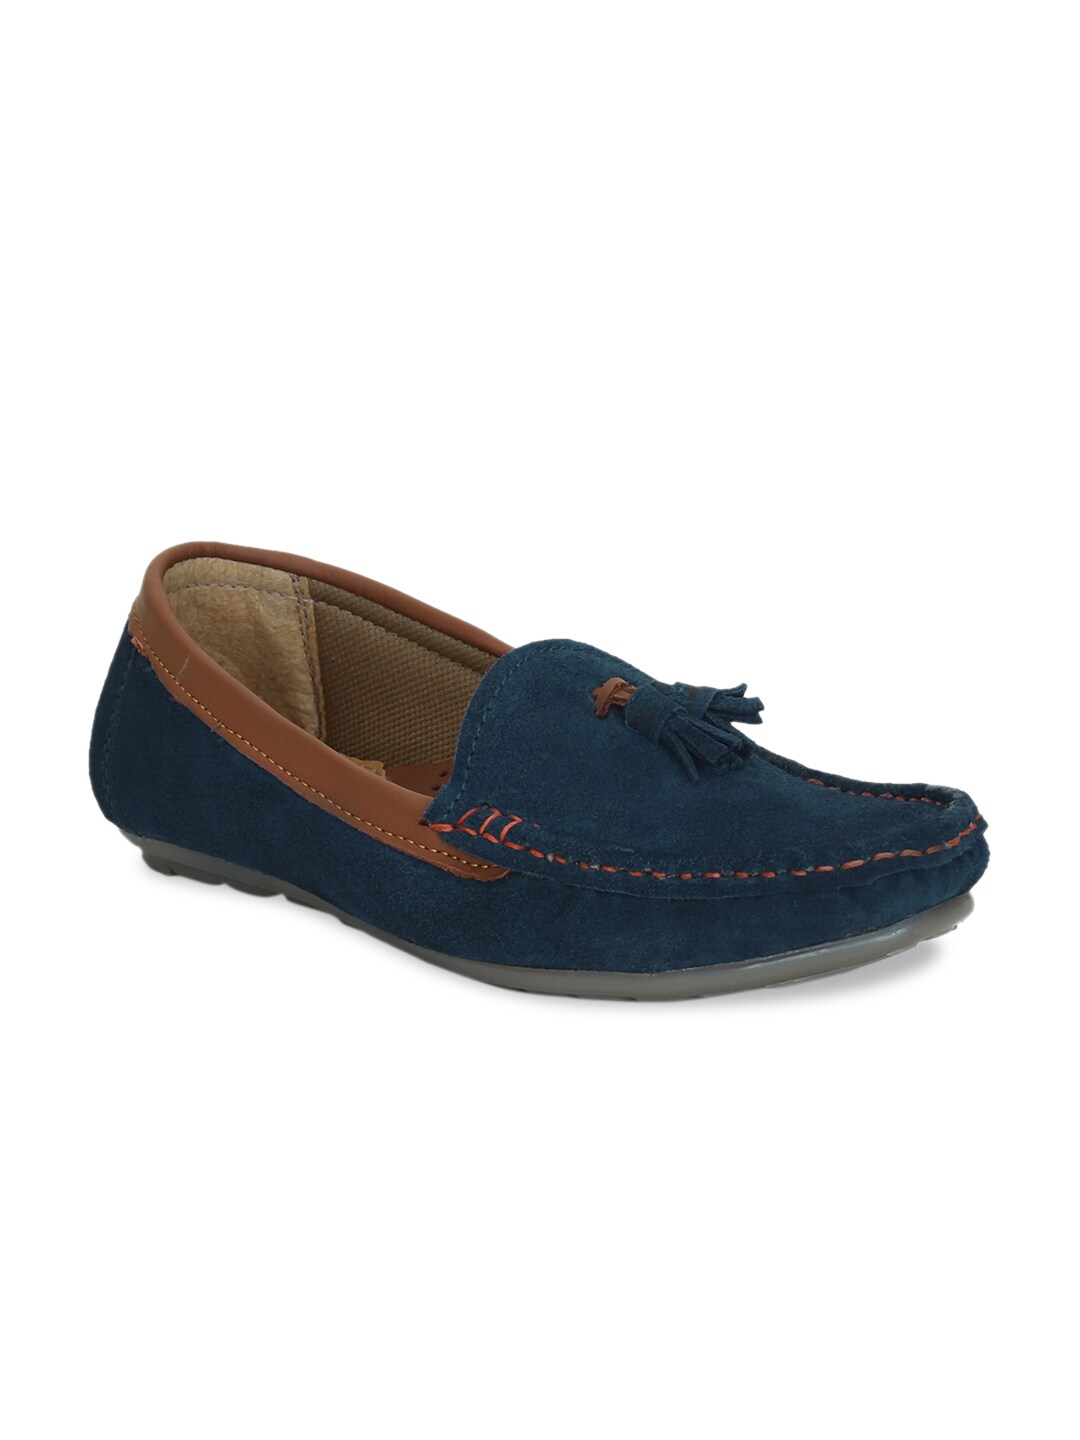 Get Glamr Women Blue Suede Loafers Price in India